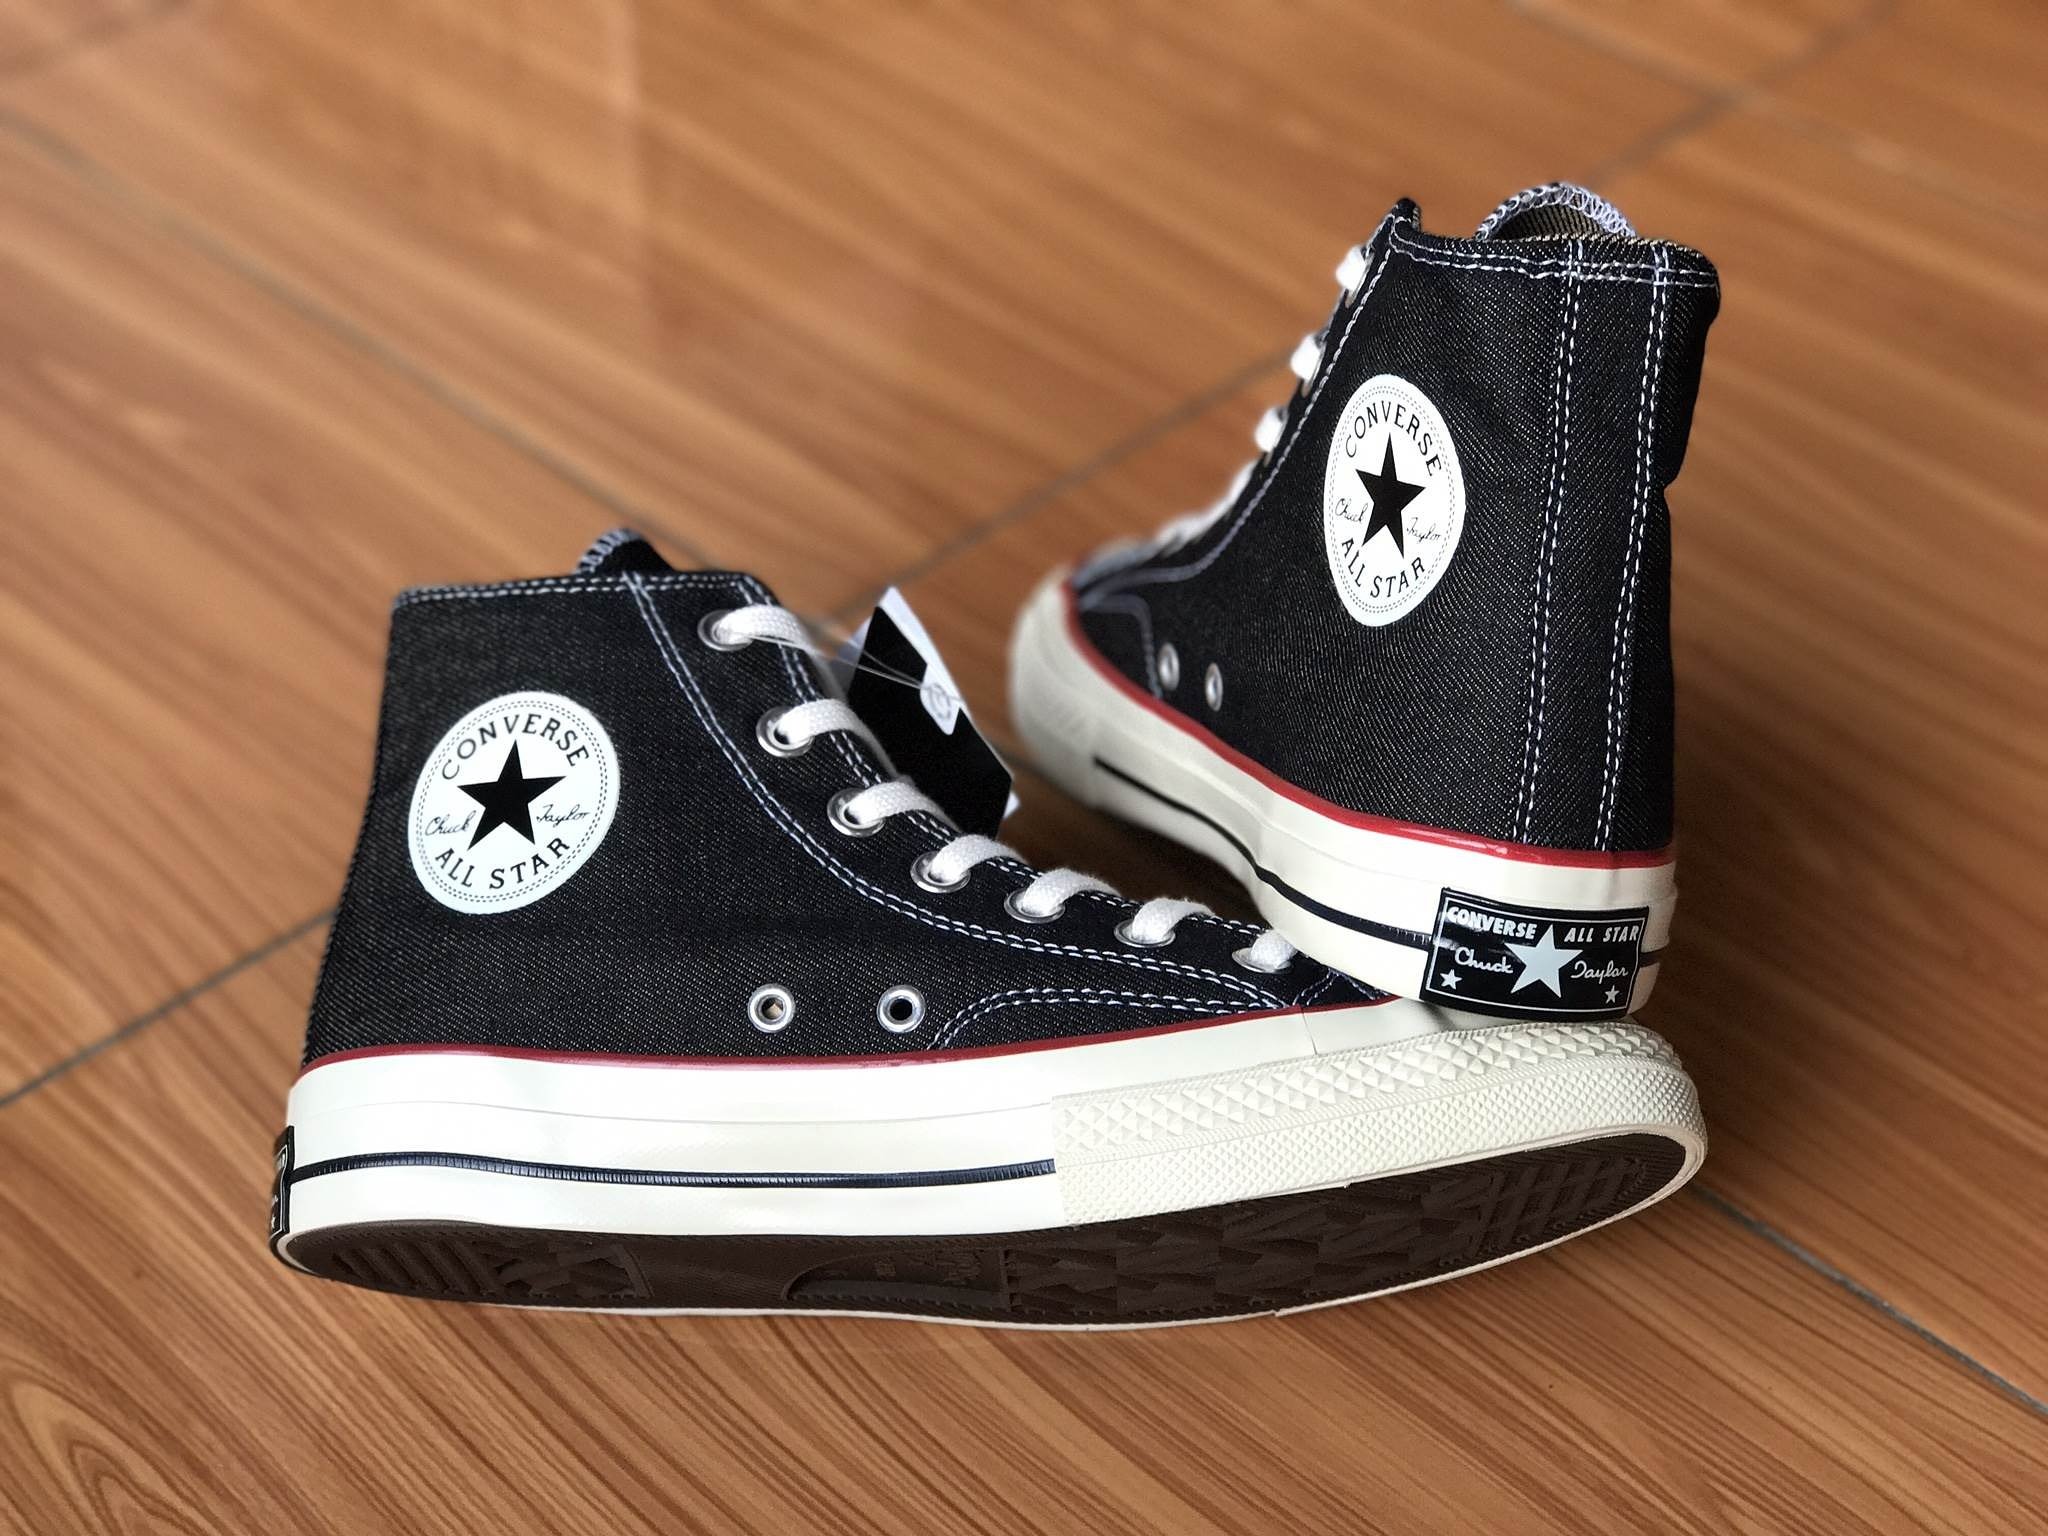 FREAKSTHRILLER on Twitter: "Converse 70s Denim Hi Premium, Made in Indonesia,  Size: 36-44 Price: Ask Order: sms/whatsapp/line: 089681838659 Line ID:  @obv7542x (pake @) https://t.co/Ig5JINRP9h" / Twitter